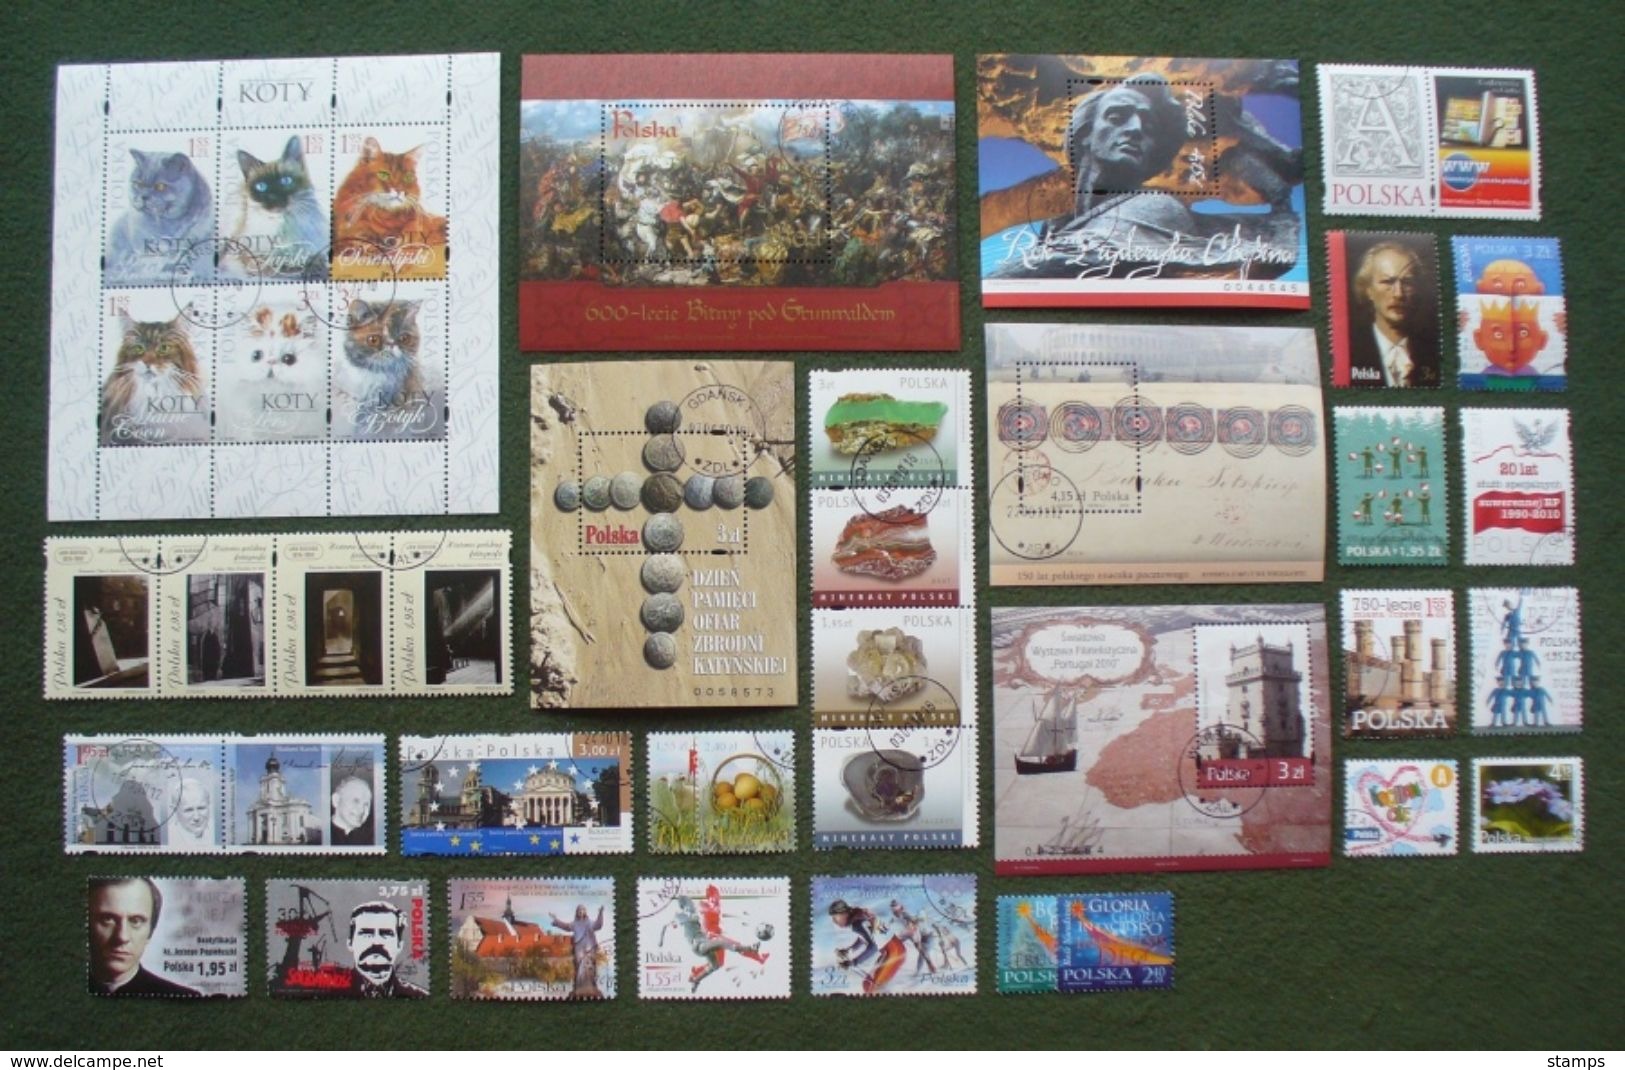 Poland 2010 - Used (o) - Almost Complete Year Set Of 29 Stamps + 6 Blocks - Nearly Full , Pologne Polonia Polen --- Ro - Années Complètes